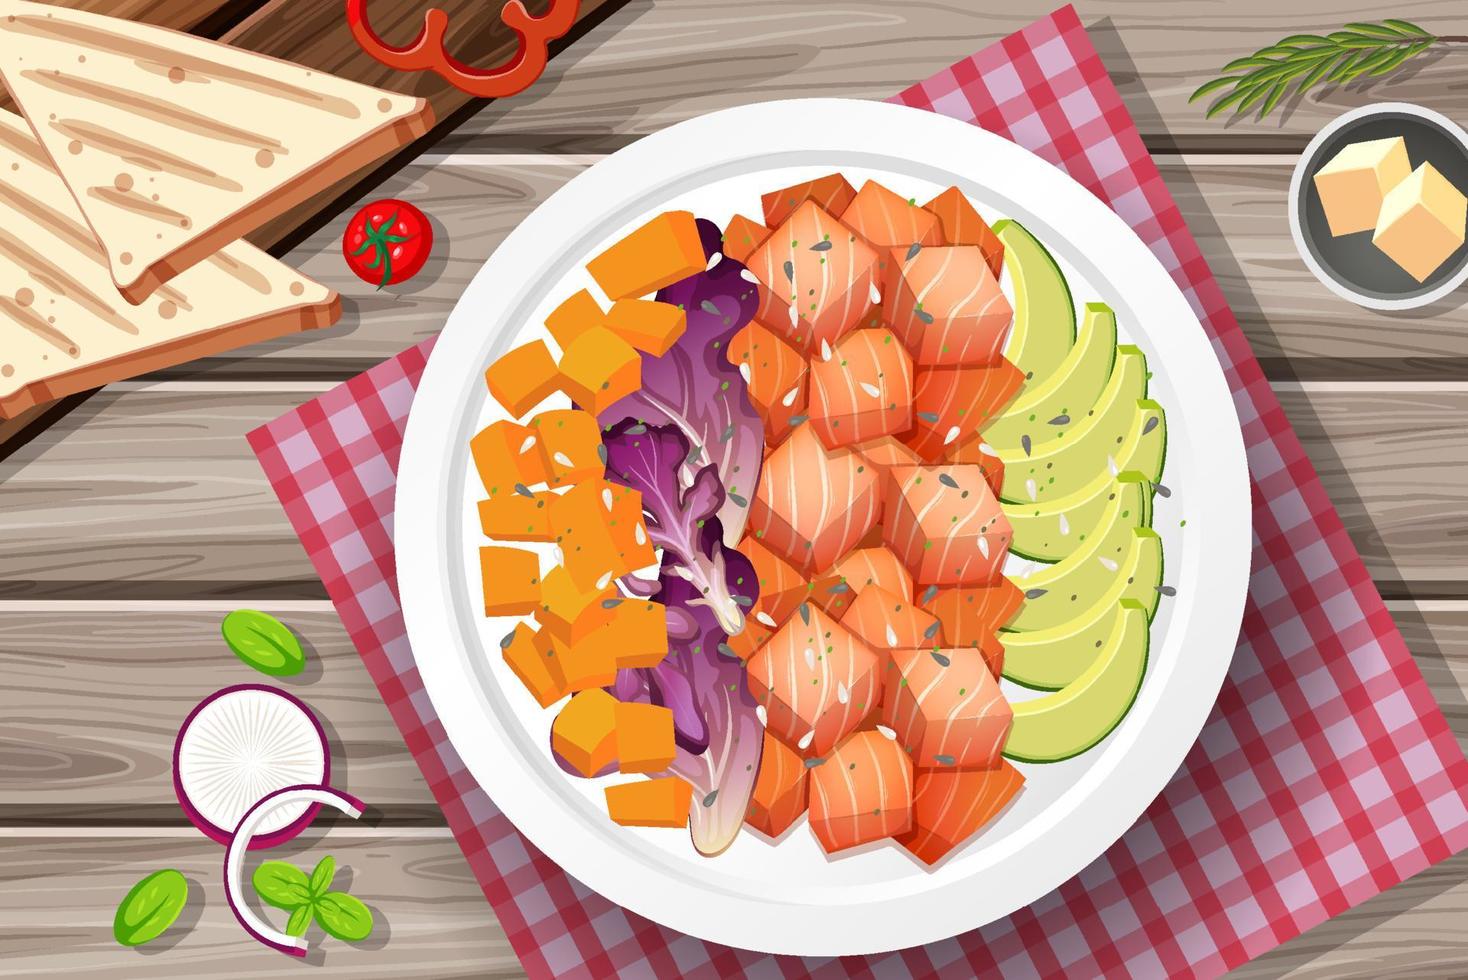 Salmon salad with bread on the table vector